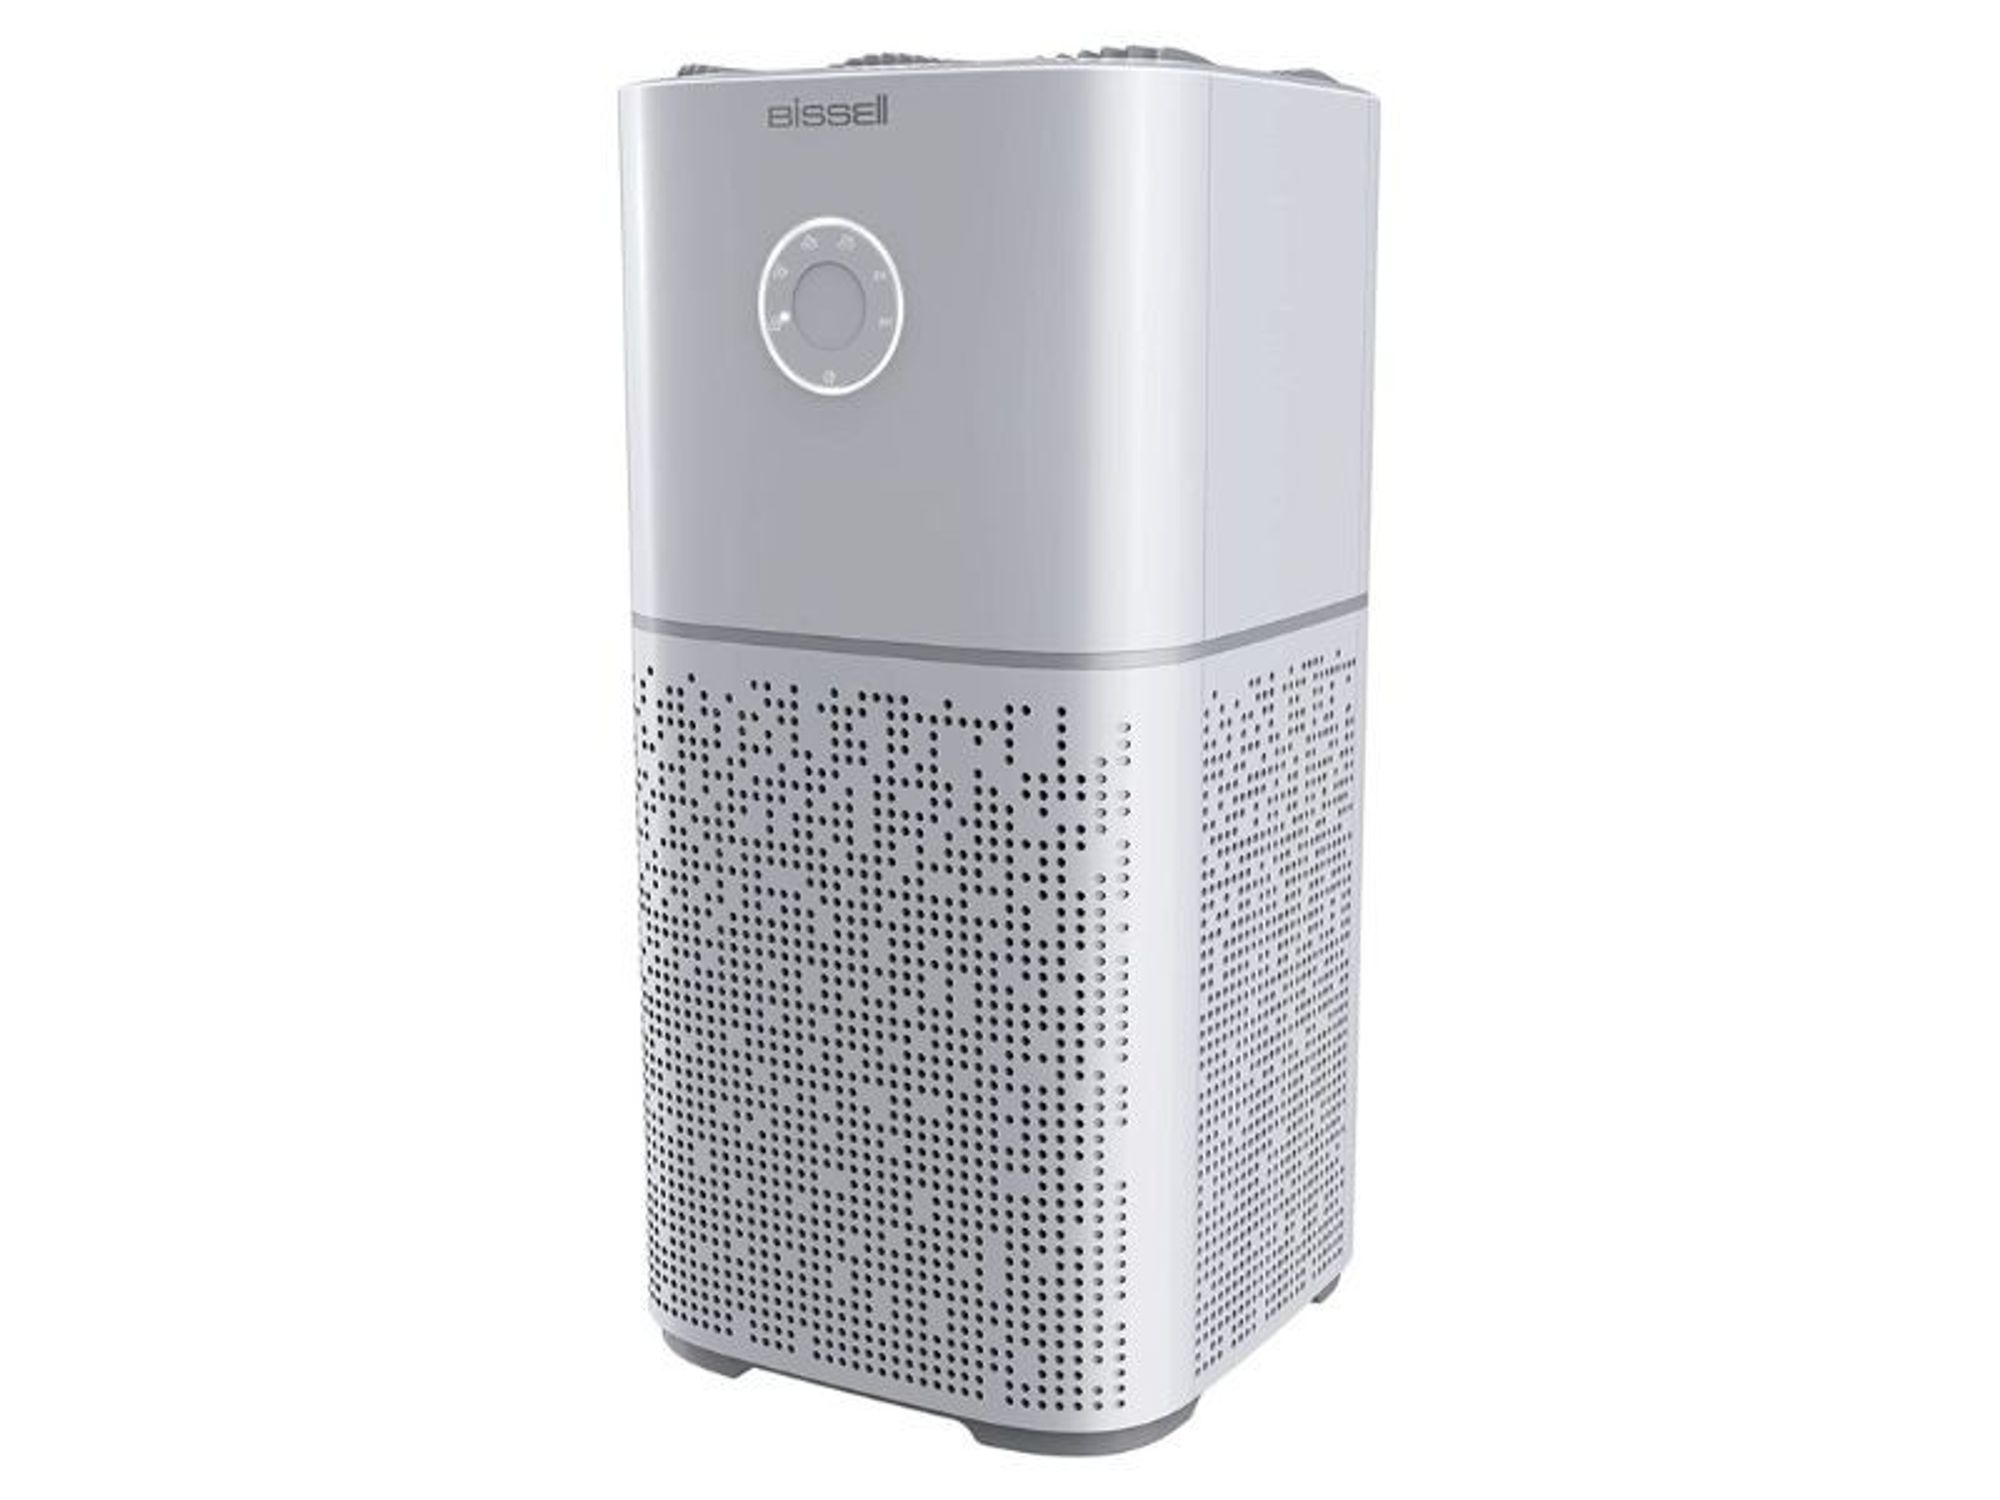 bissell gray air purifier